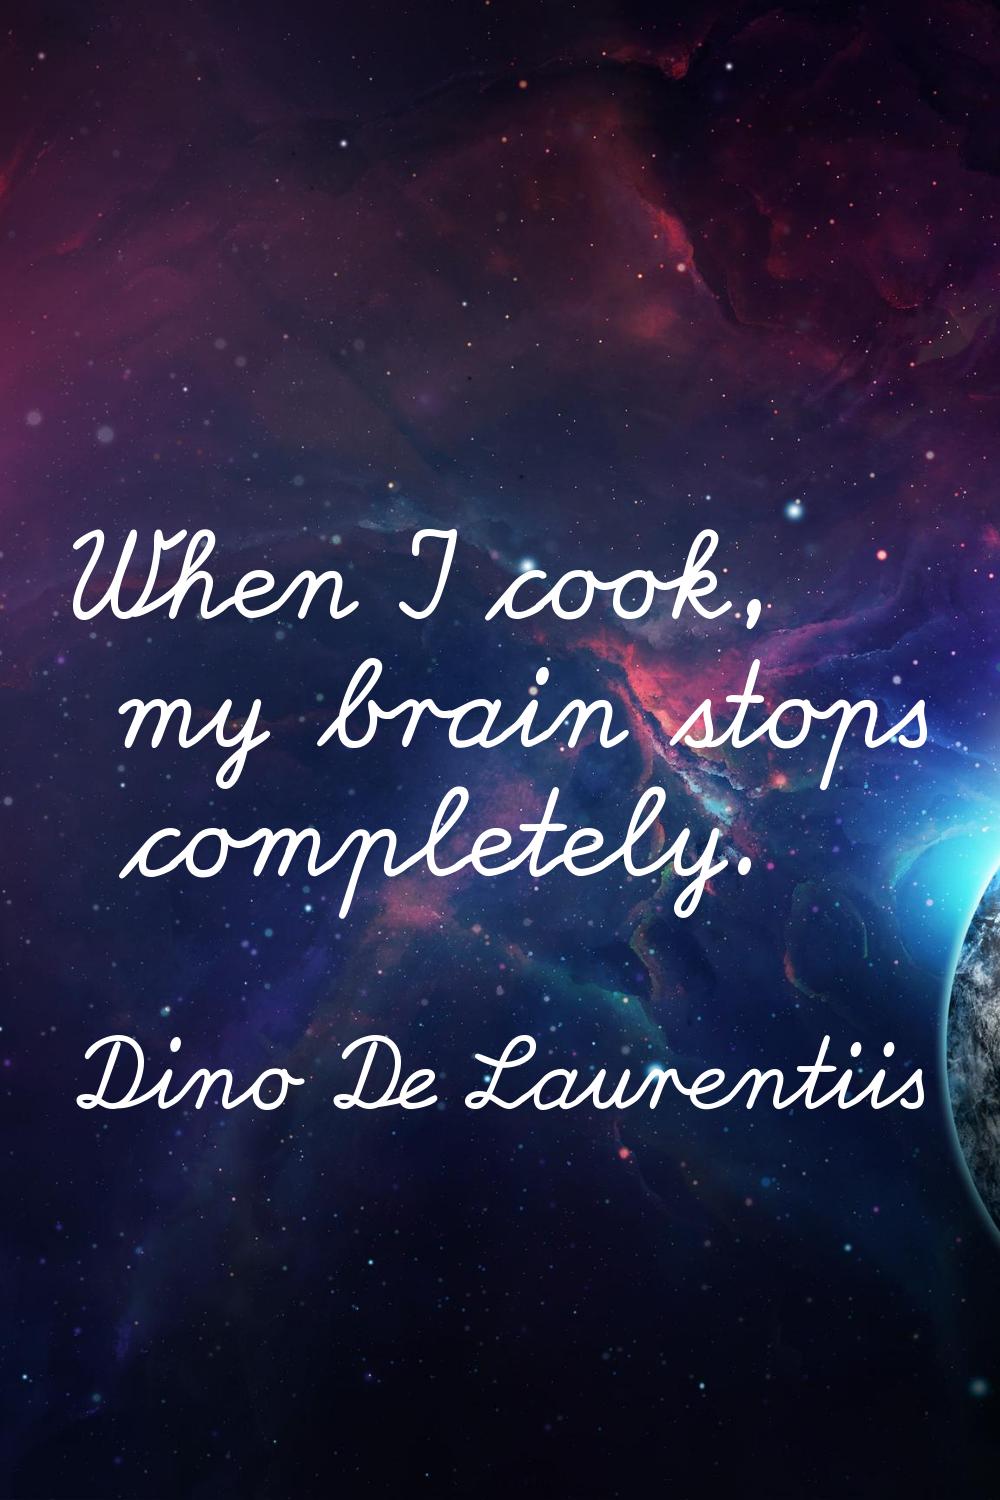 When I cook, my brain stops completely.